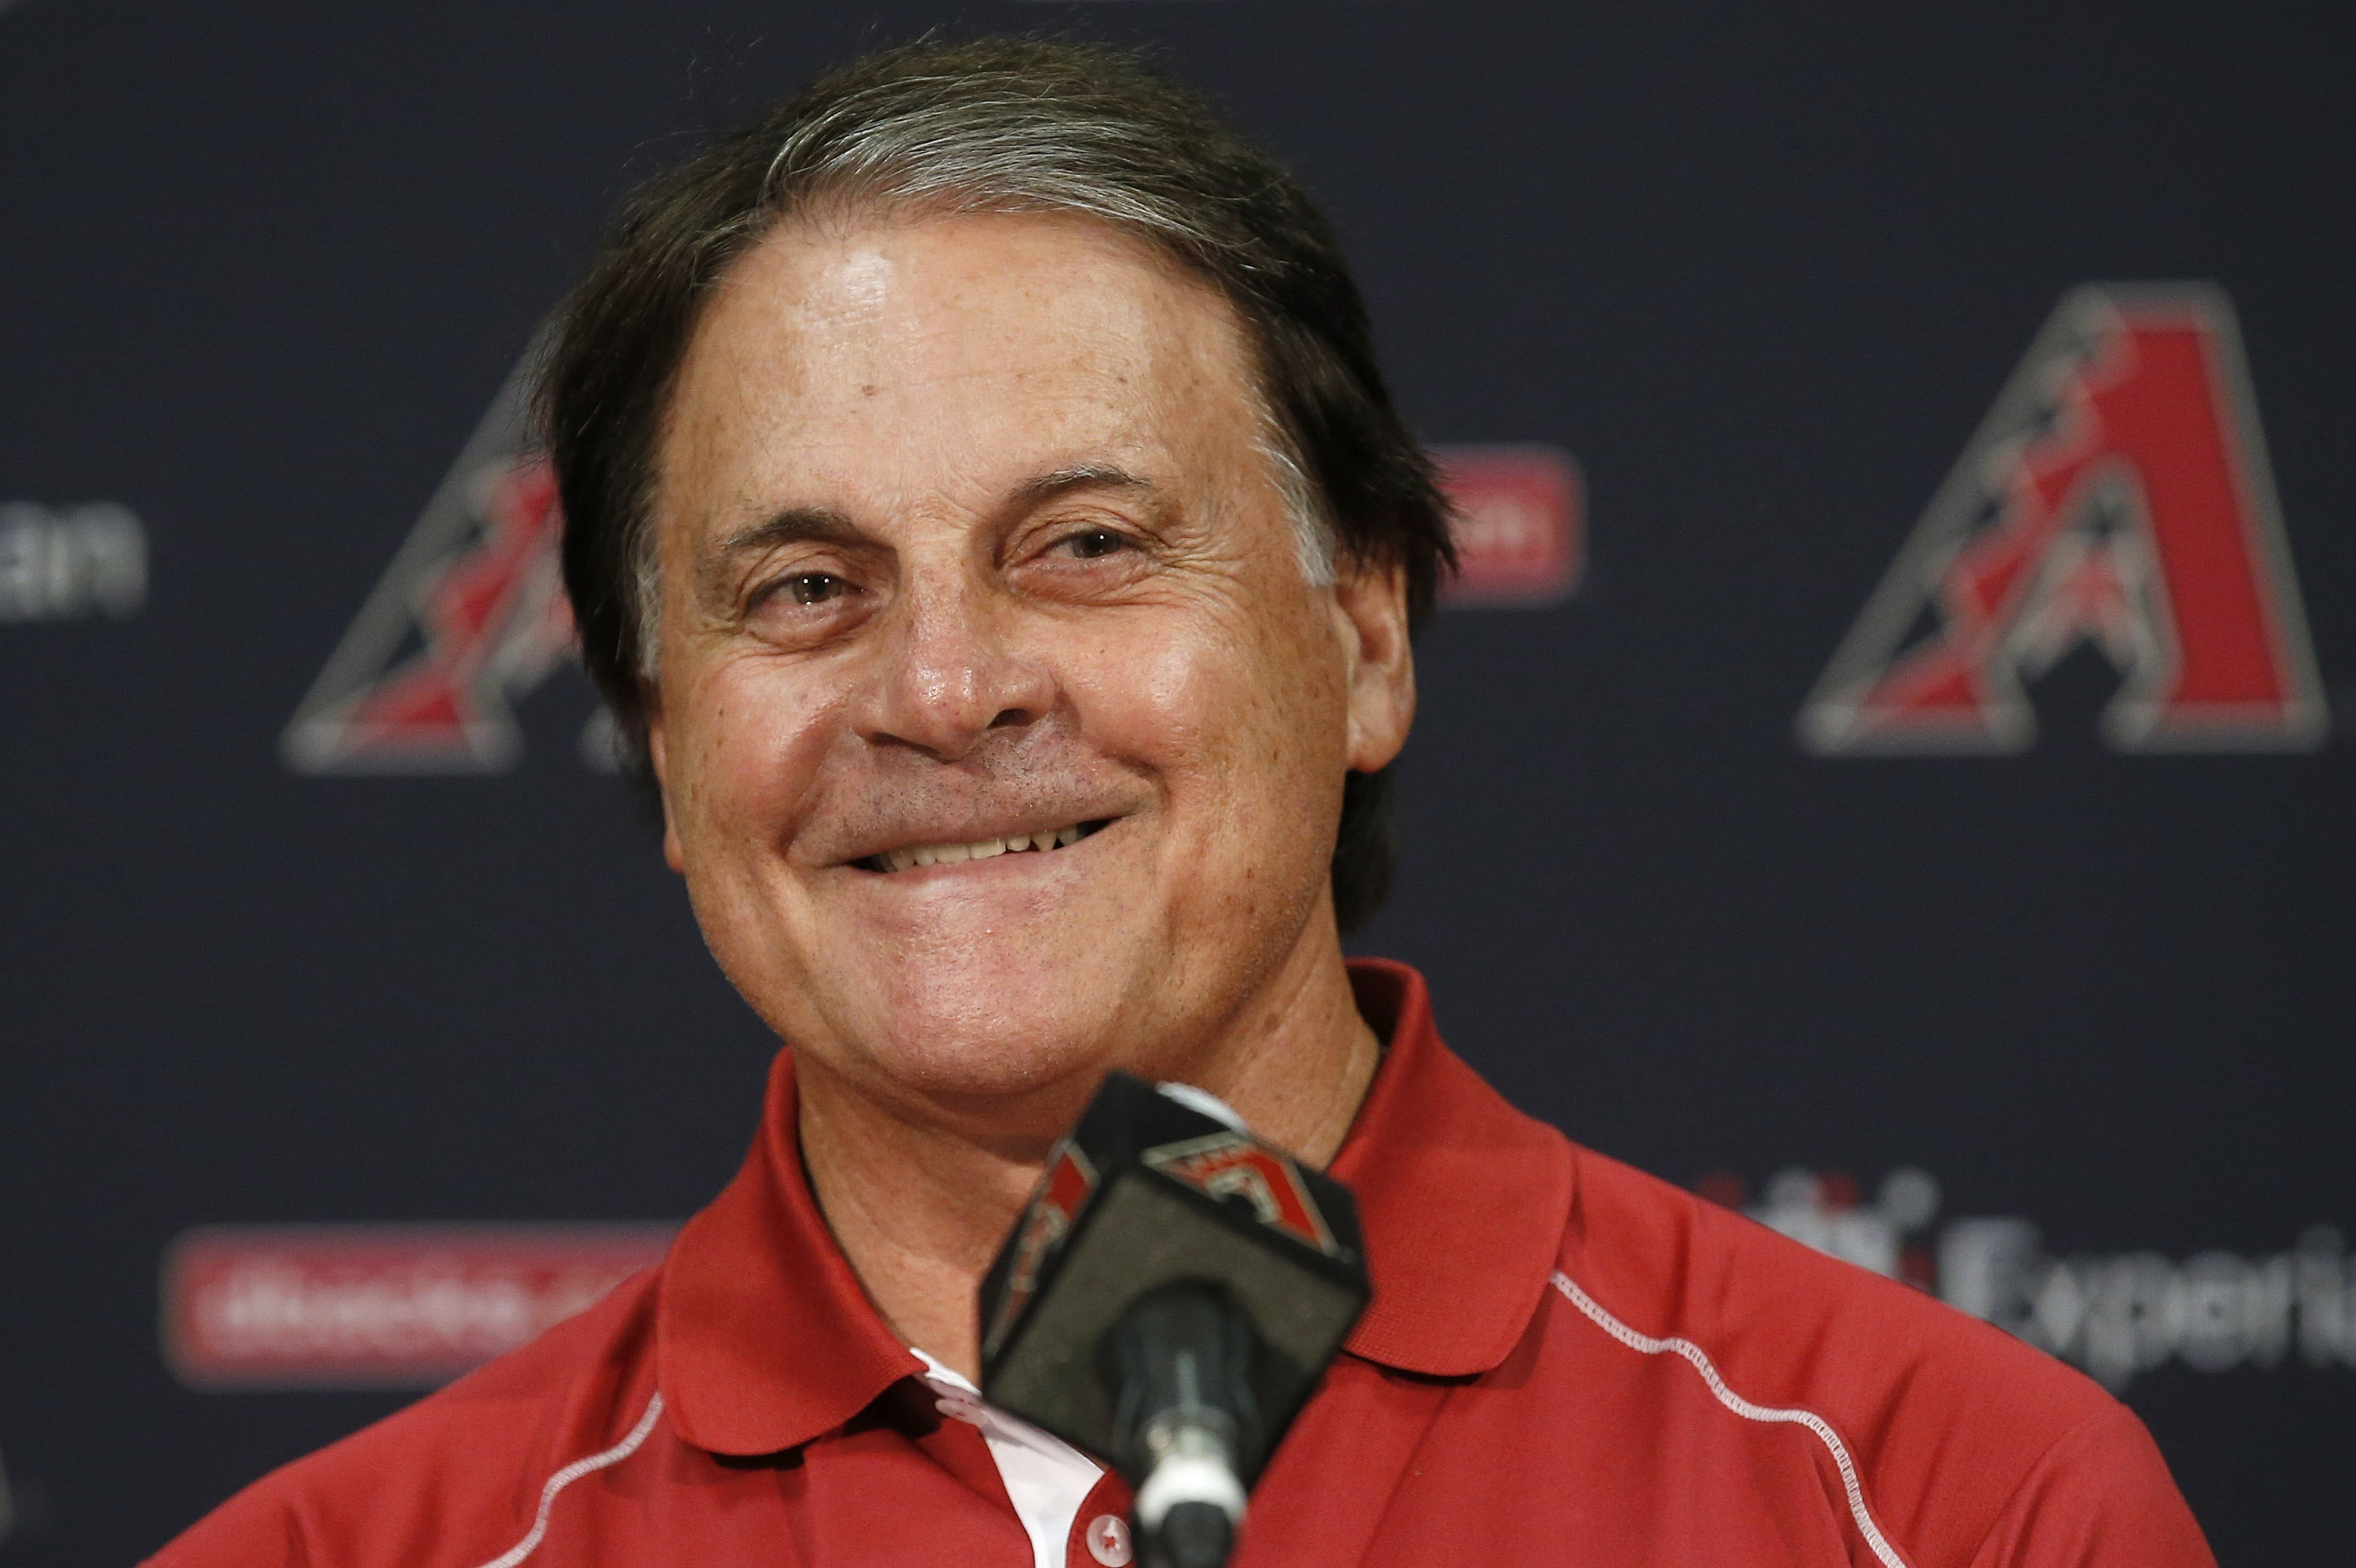 Tony La Russa returns to playoffs with Chicago White Sox - The San